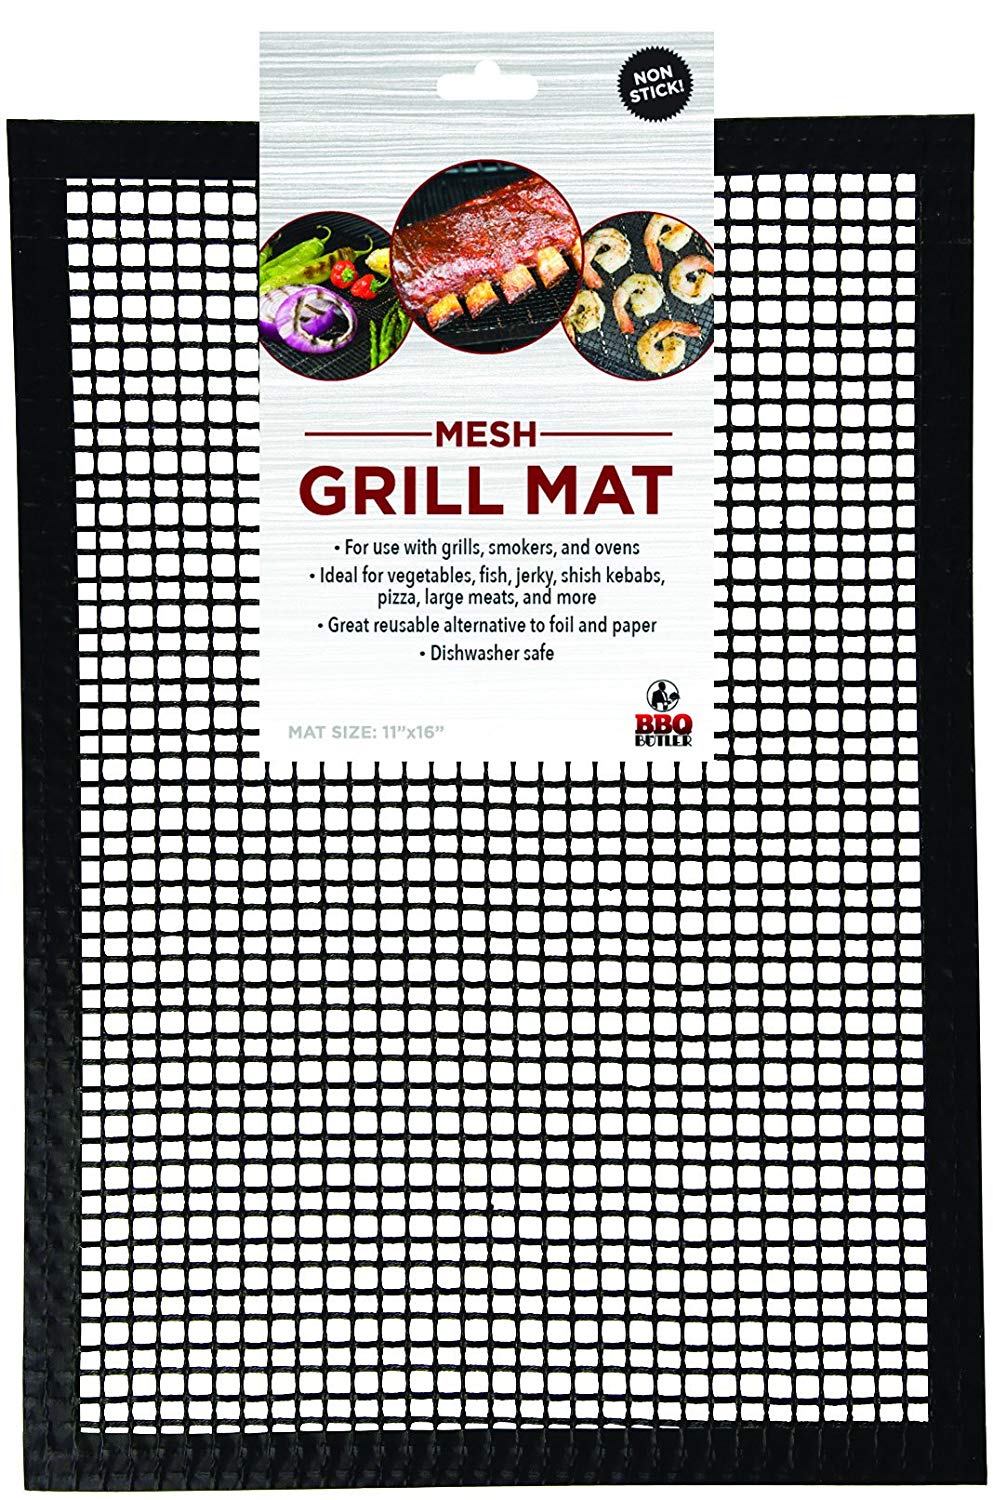 Grill Mat BBQ Tool - Mesh Grill Mat That Allows Smoke to Pass Through - Non-Stick - Perfect For Grills, Smokers and Ovens - image 1 of 6